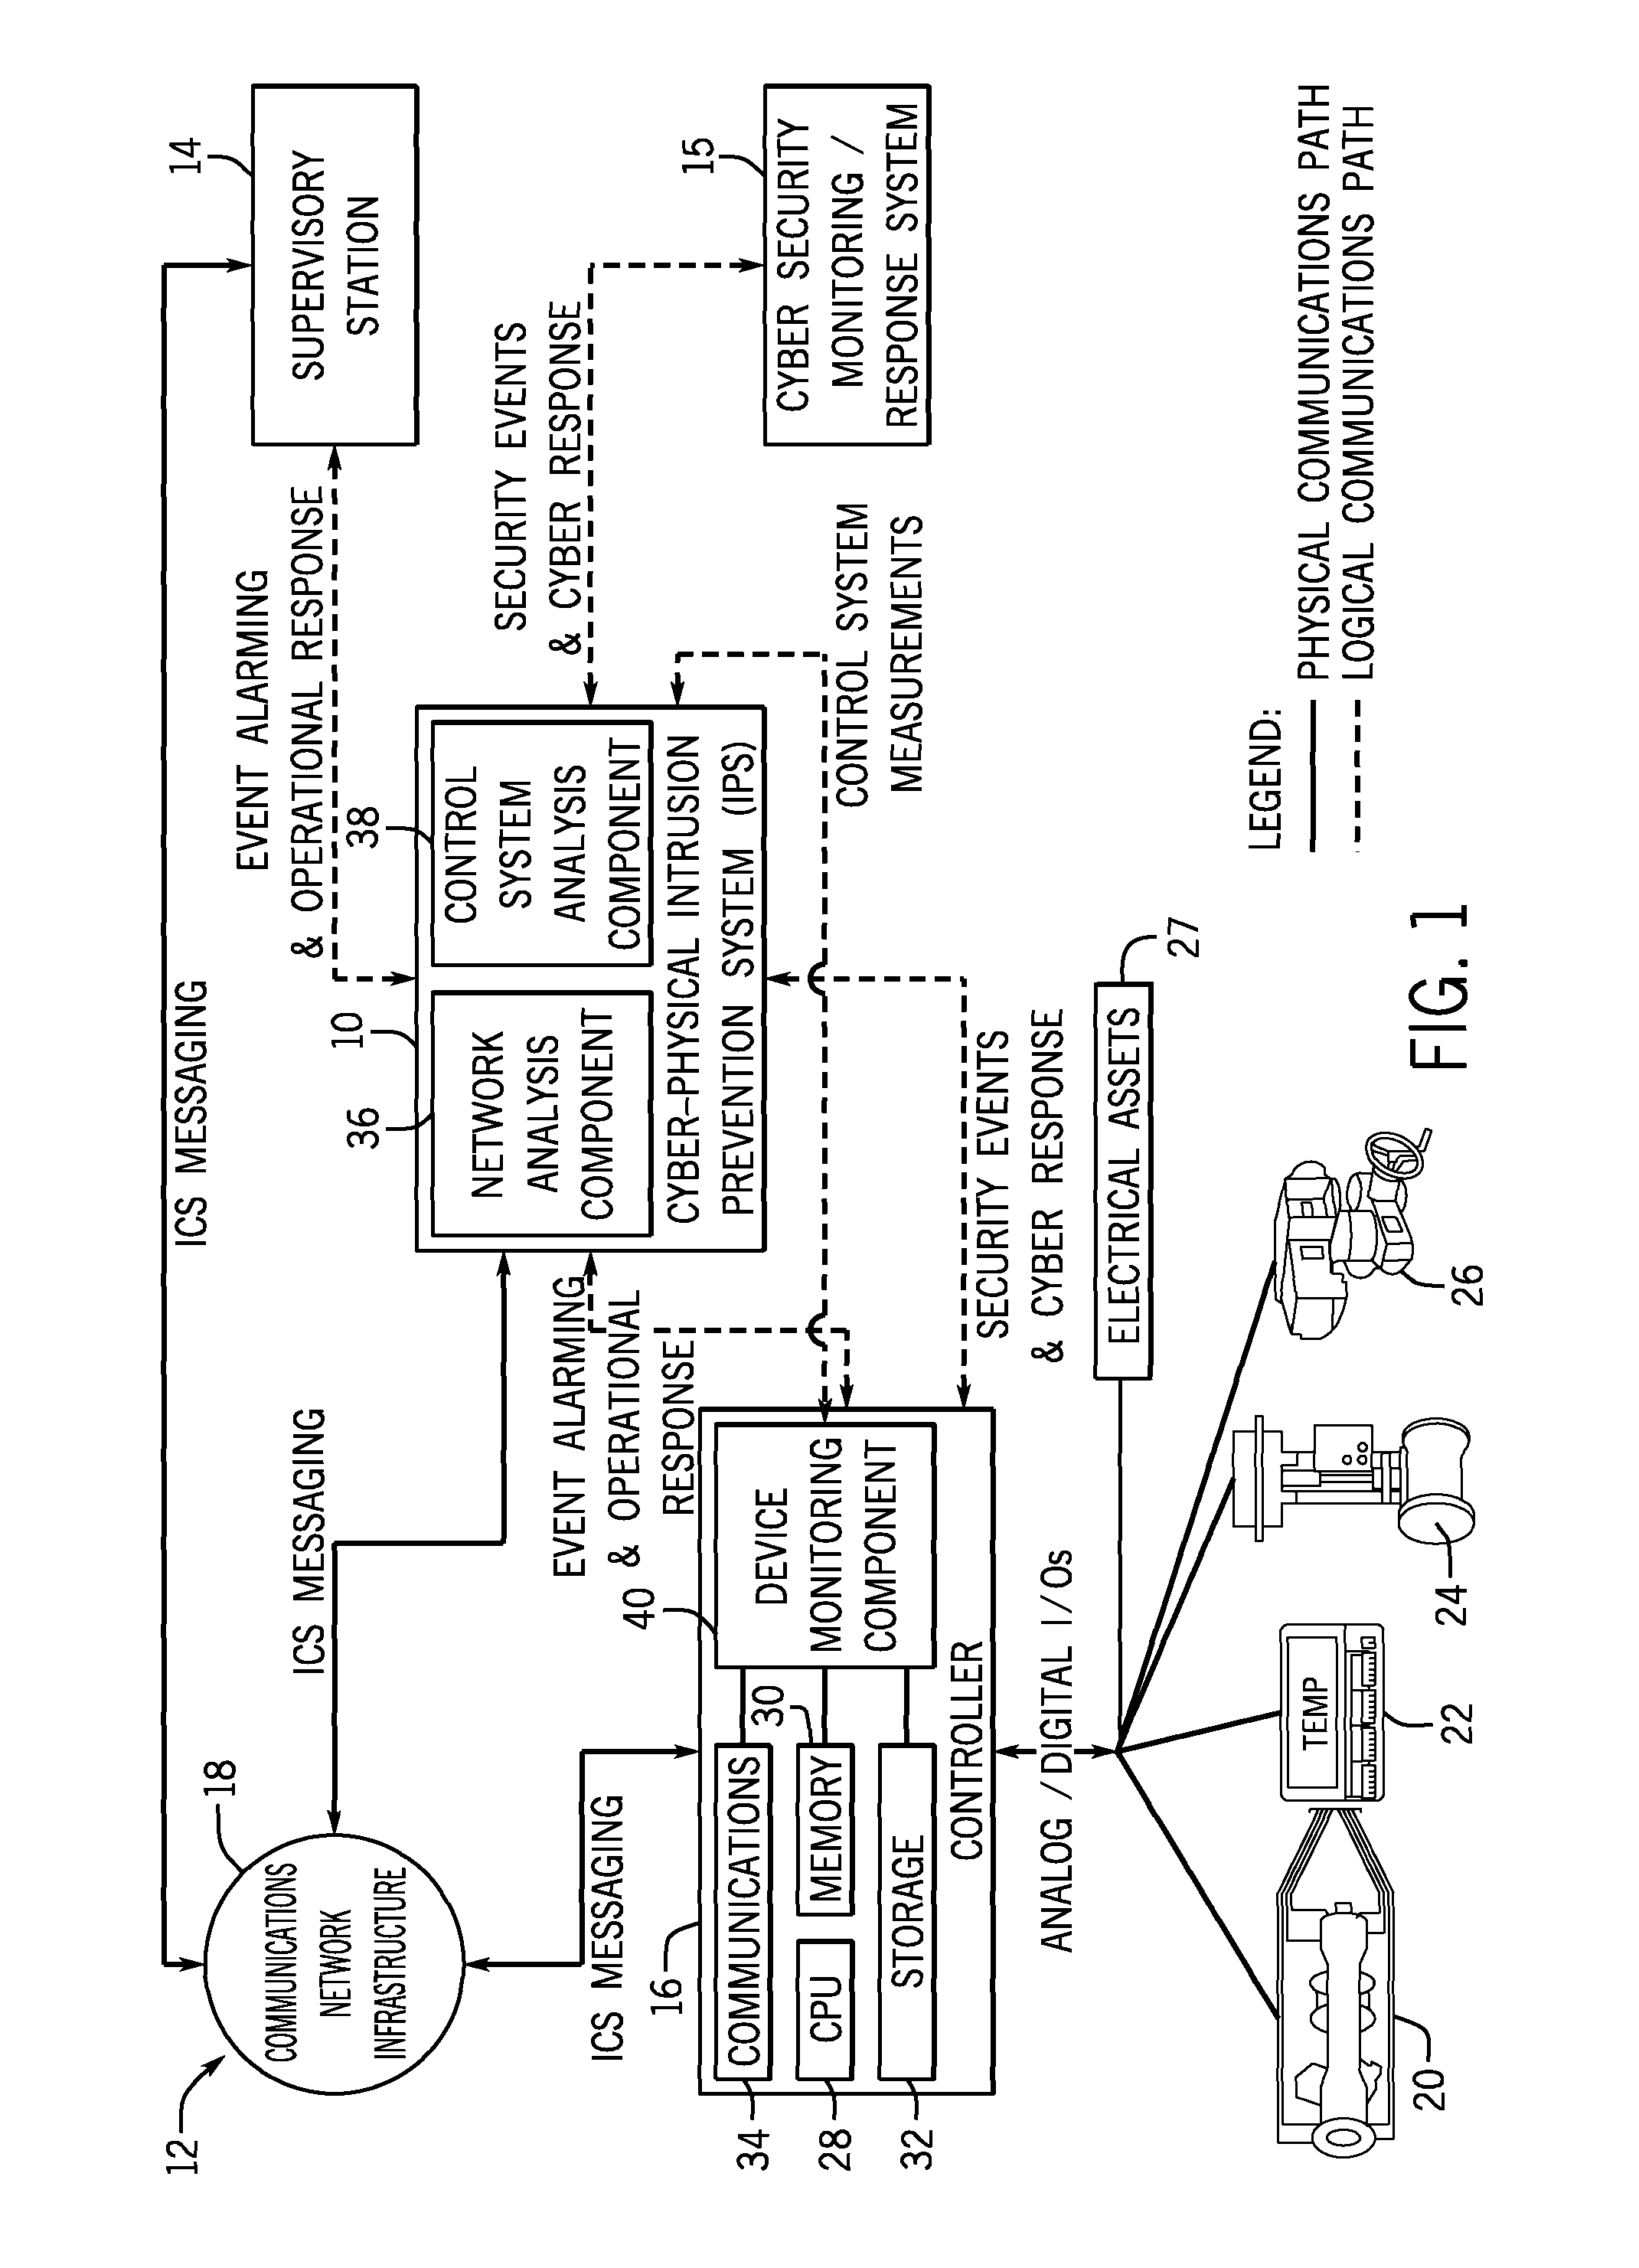 Intelligent cyberphysical intrusion detection and prevention systems and methods for industrial control systems